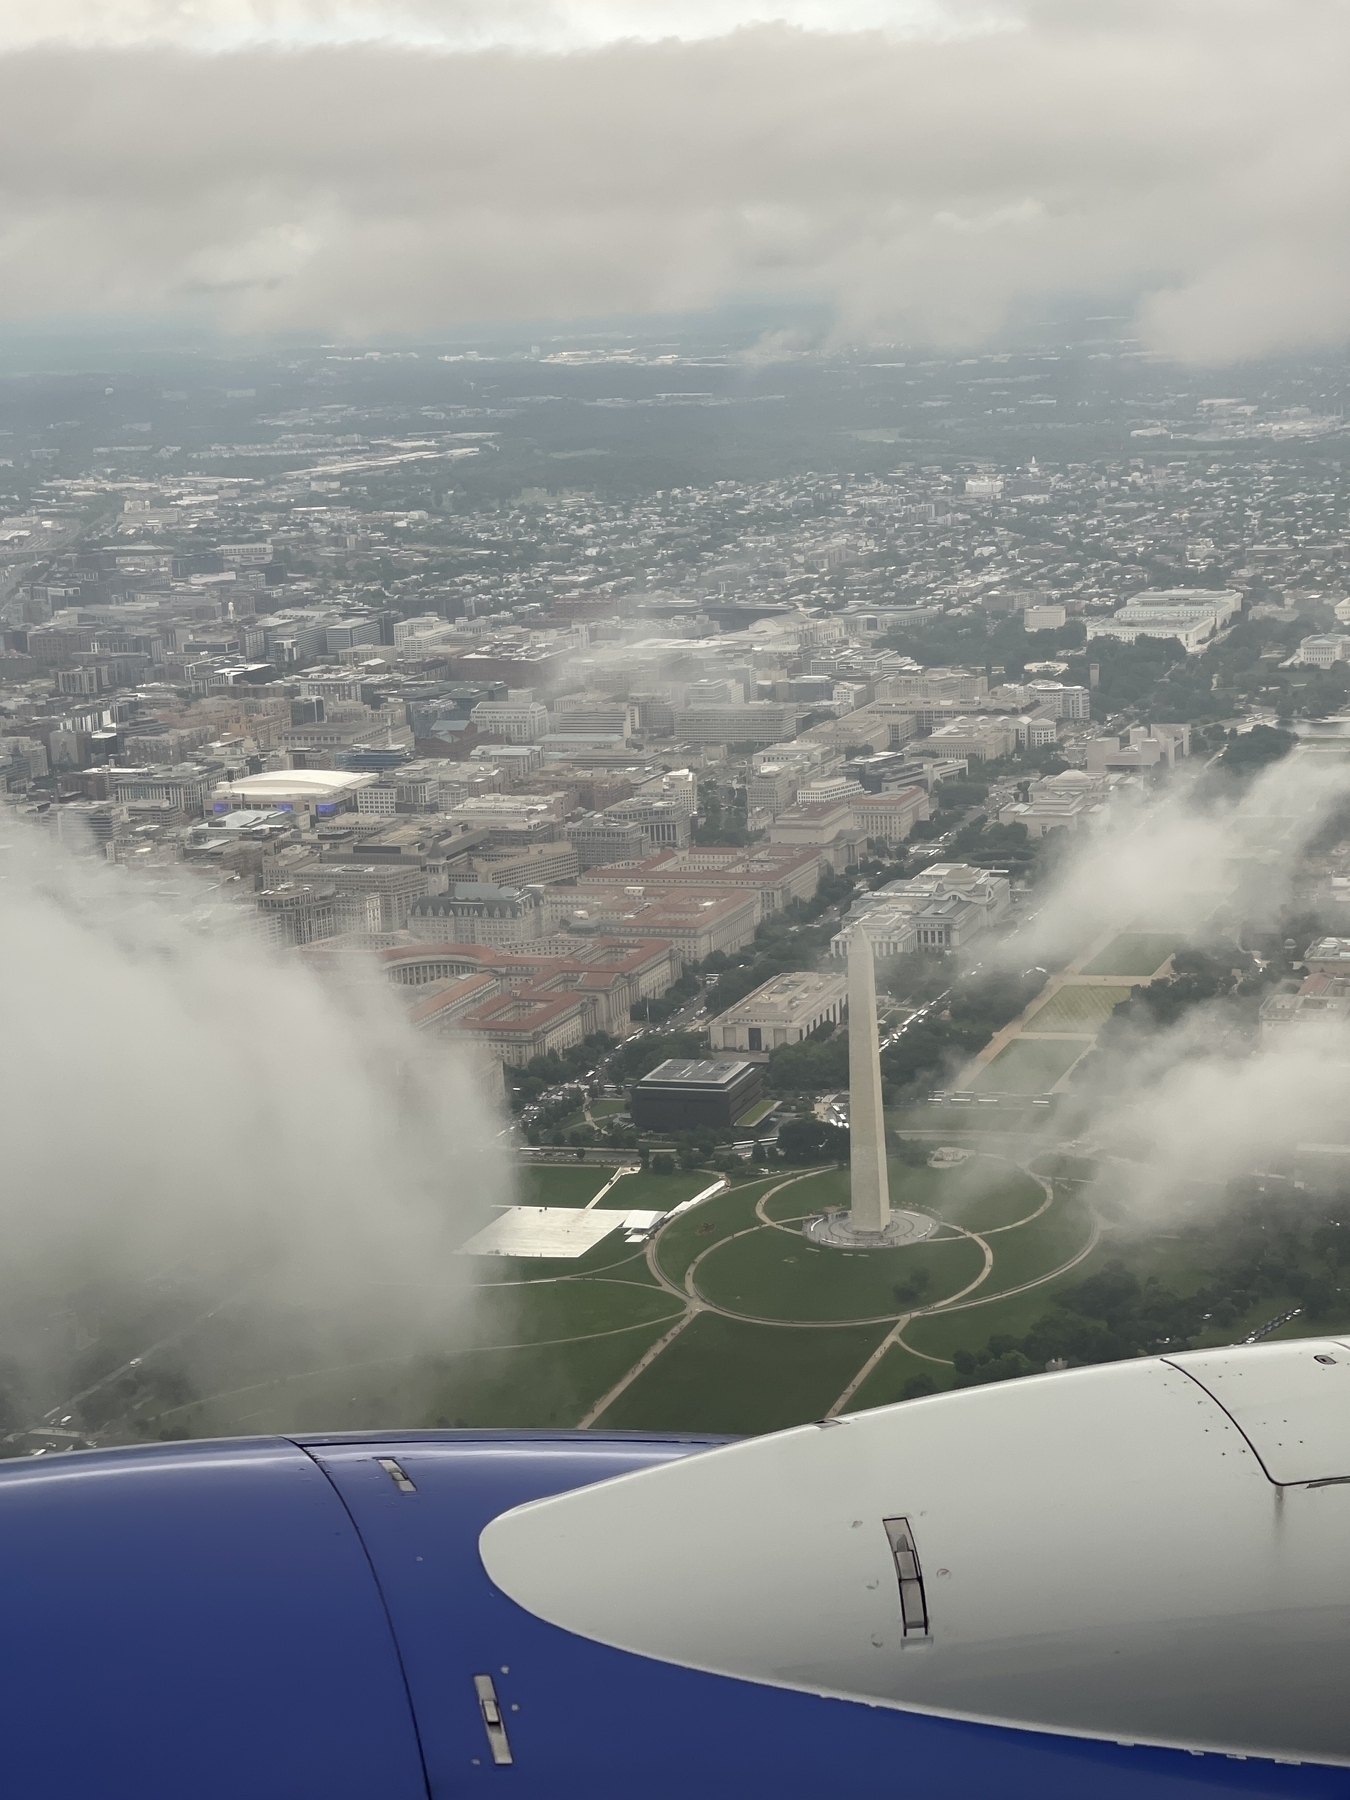 Photograph from an airplane window of the Washington Monument surrounded by clouds.